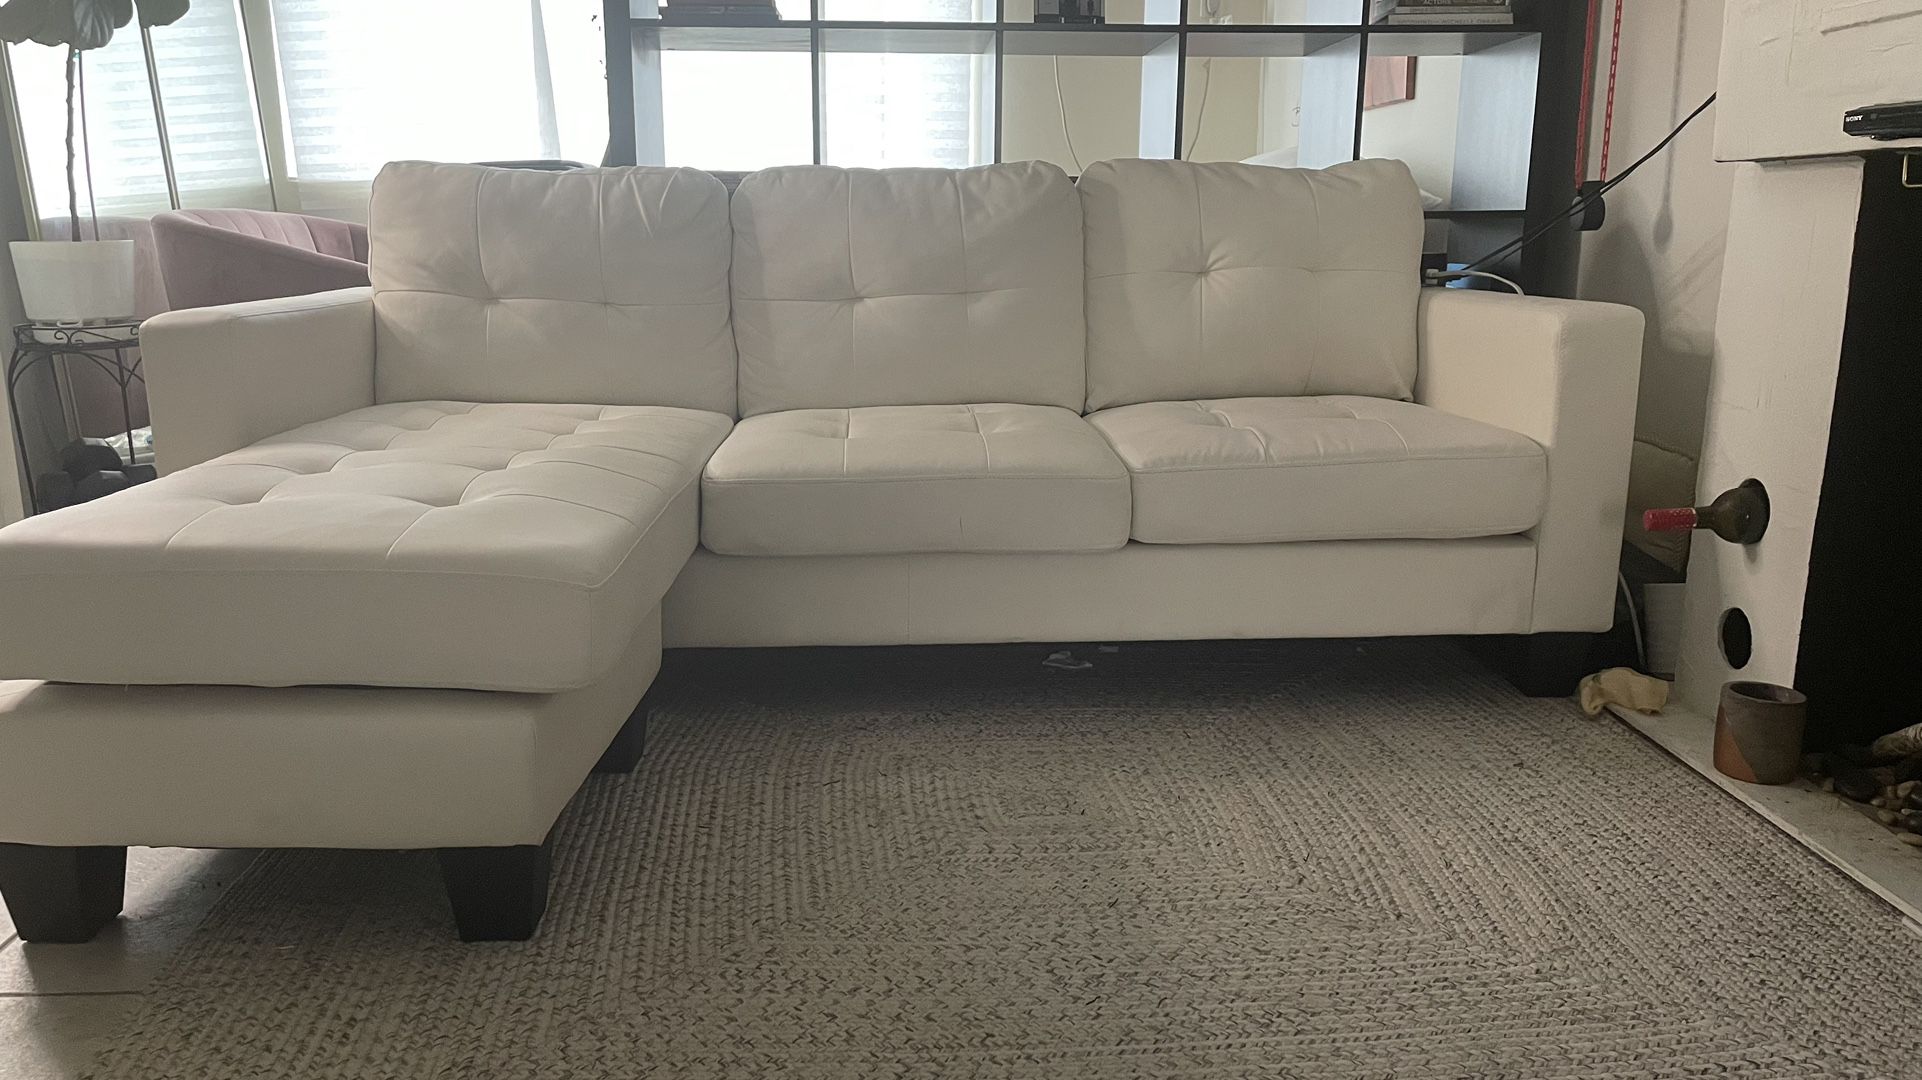 3-Seat L Shaped Reversible White Leather Couch 